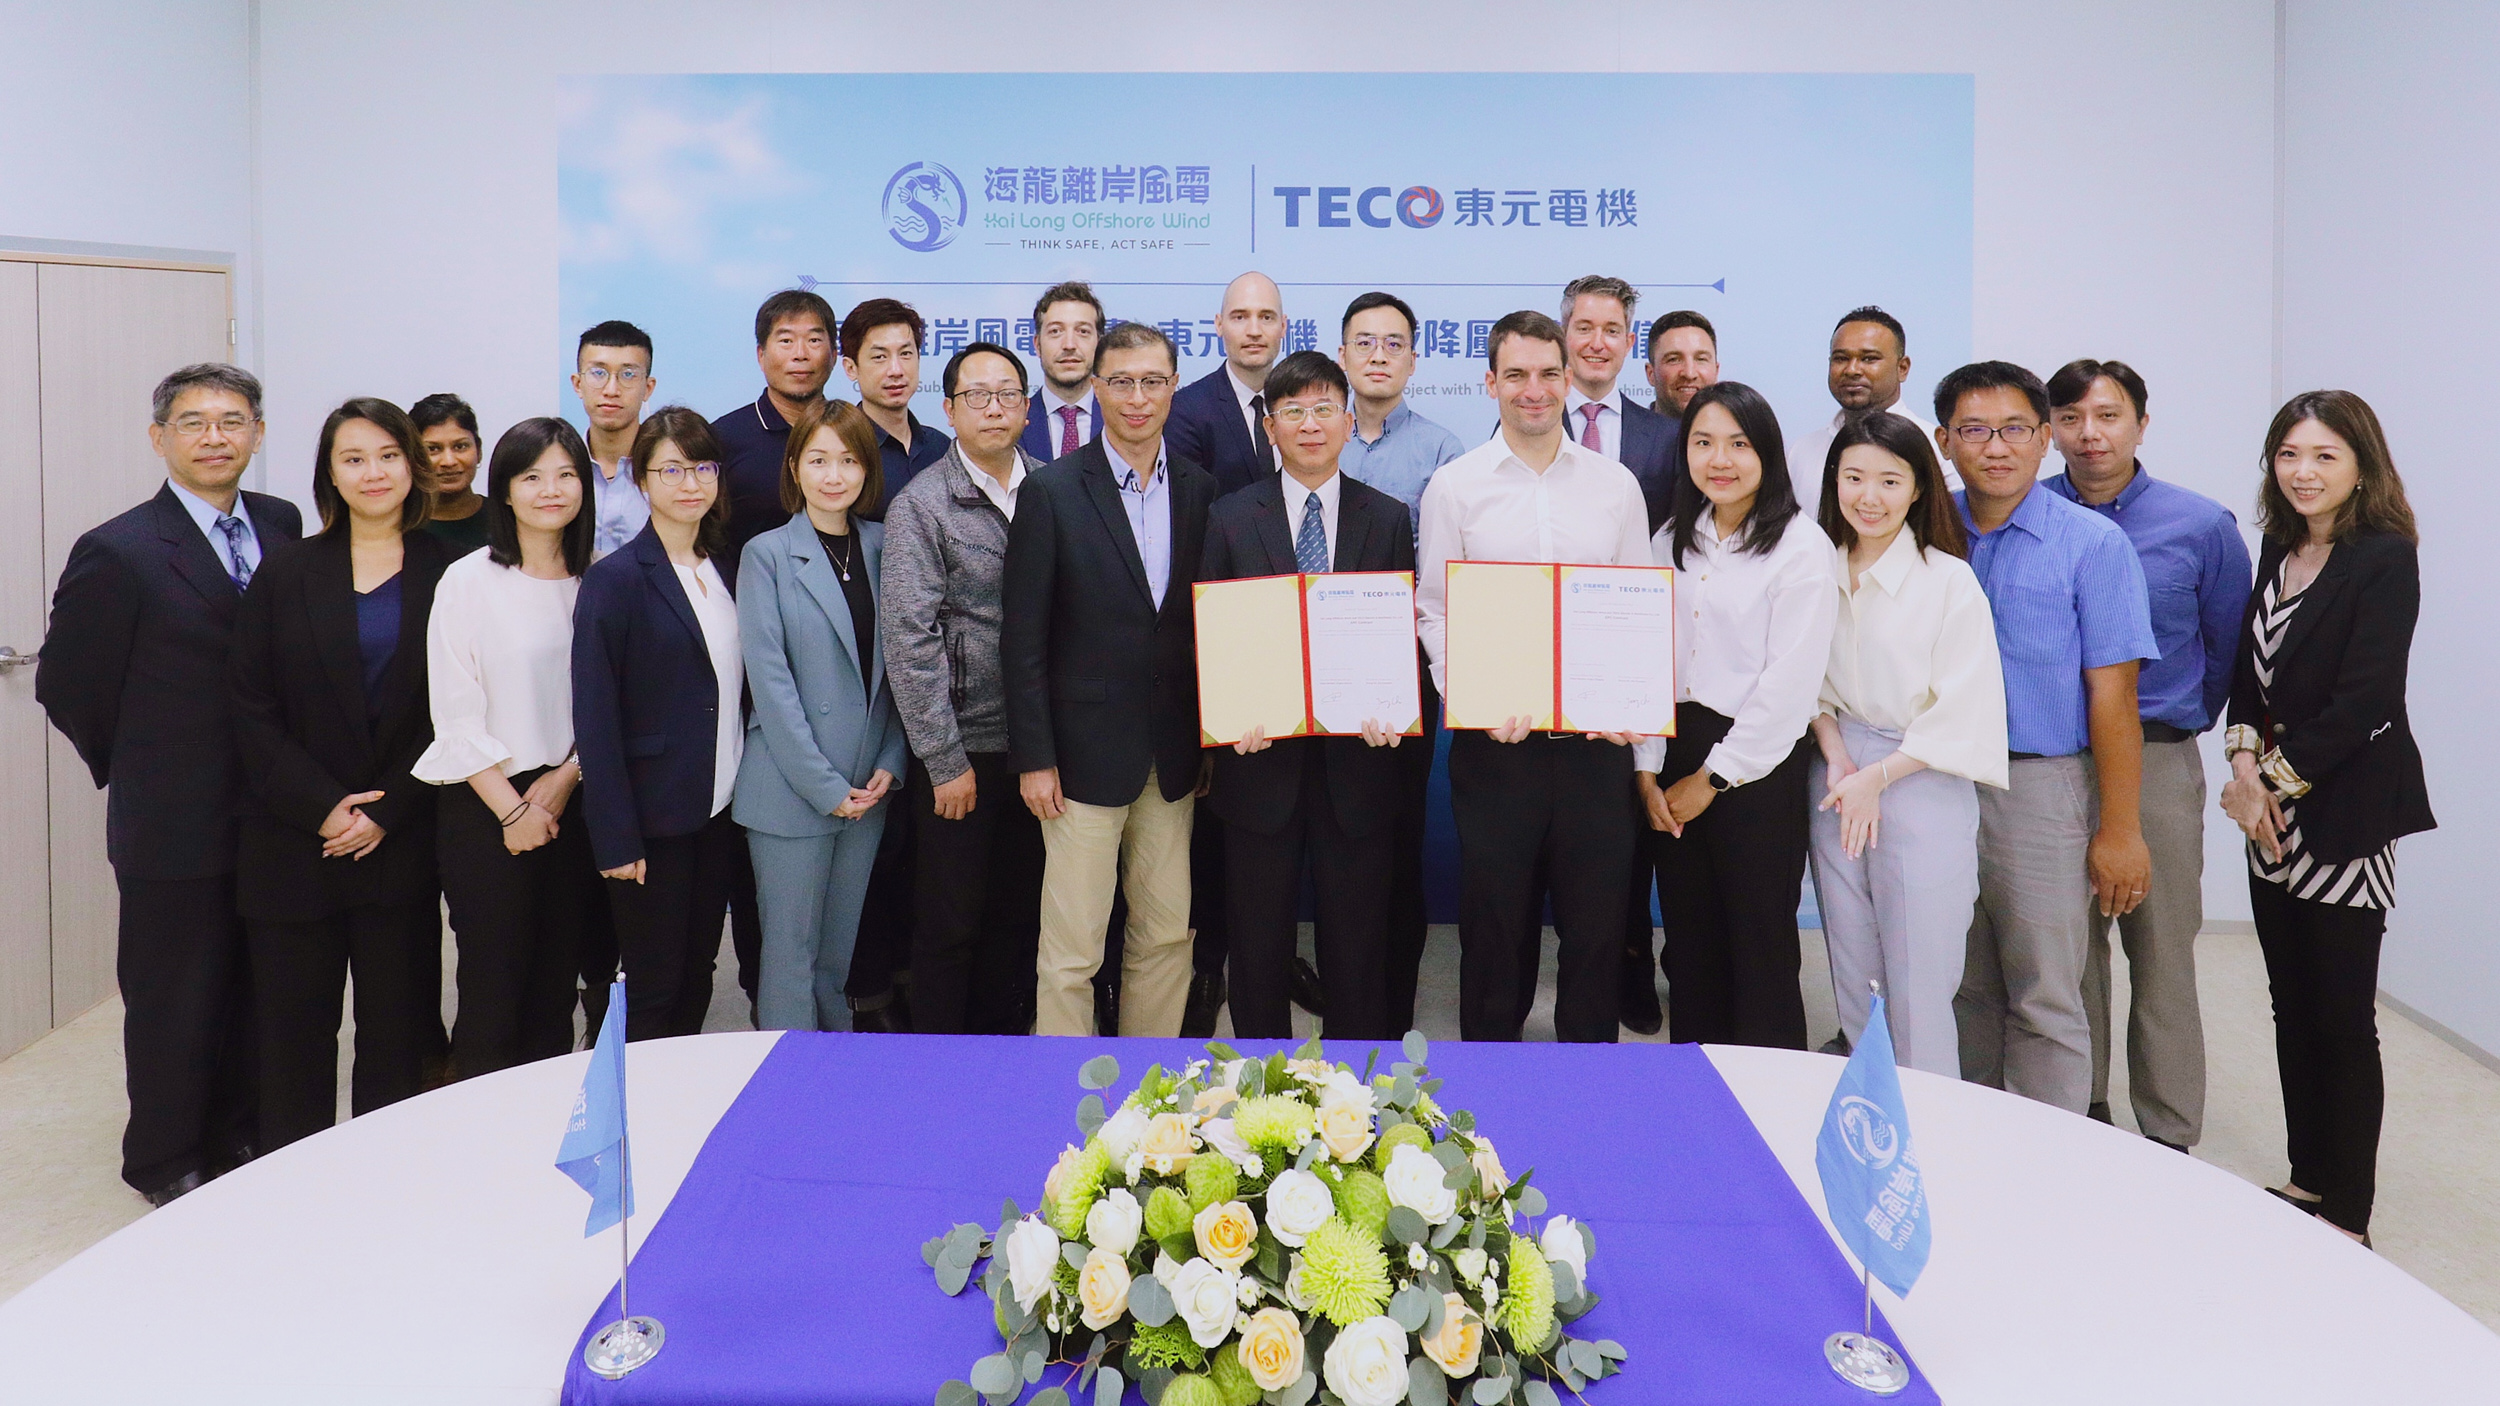 Largest Installed Capacity in Taiwan Ever: Hai Long, TECO Sign EPC Contract for Onshore Substation, Going Beyond Localization Commitments